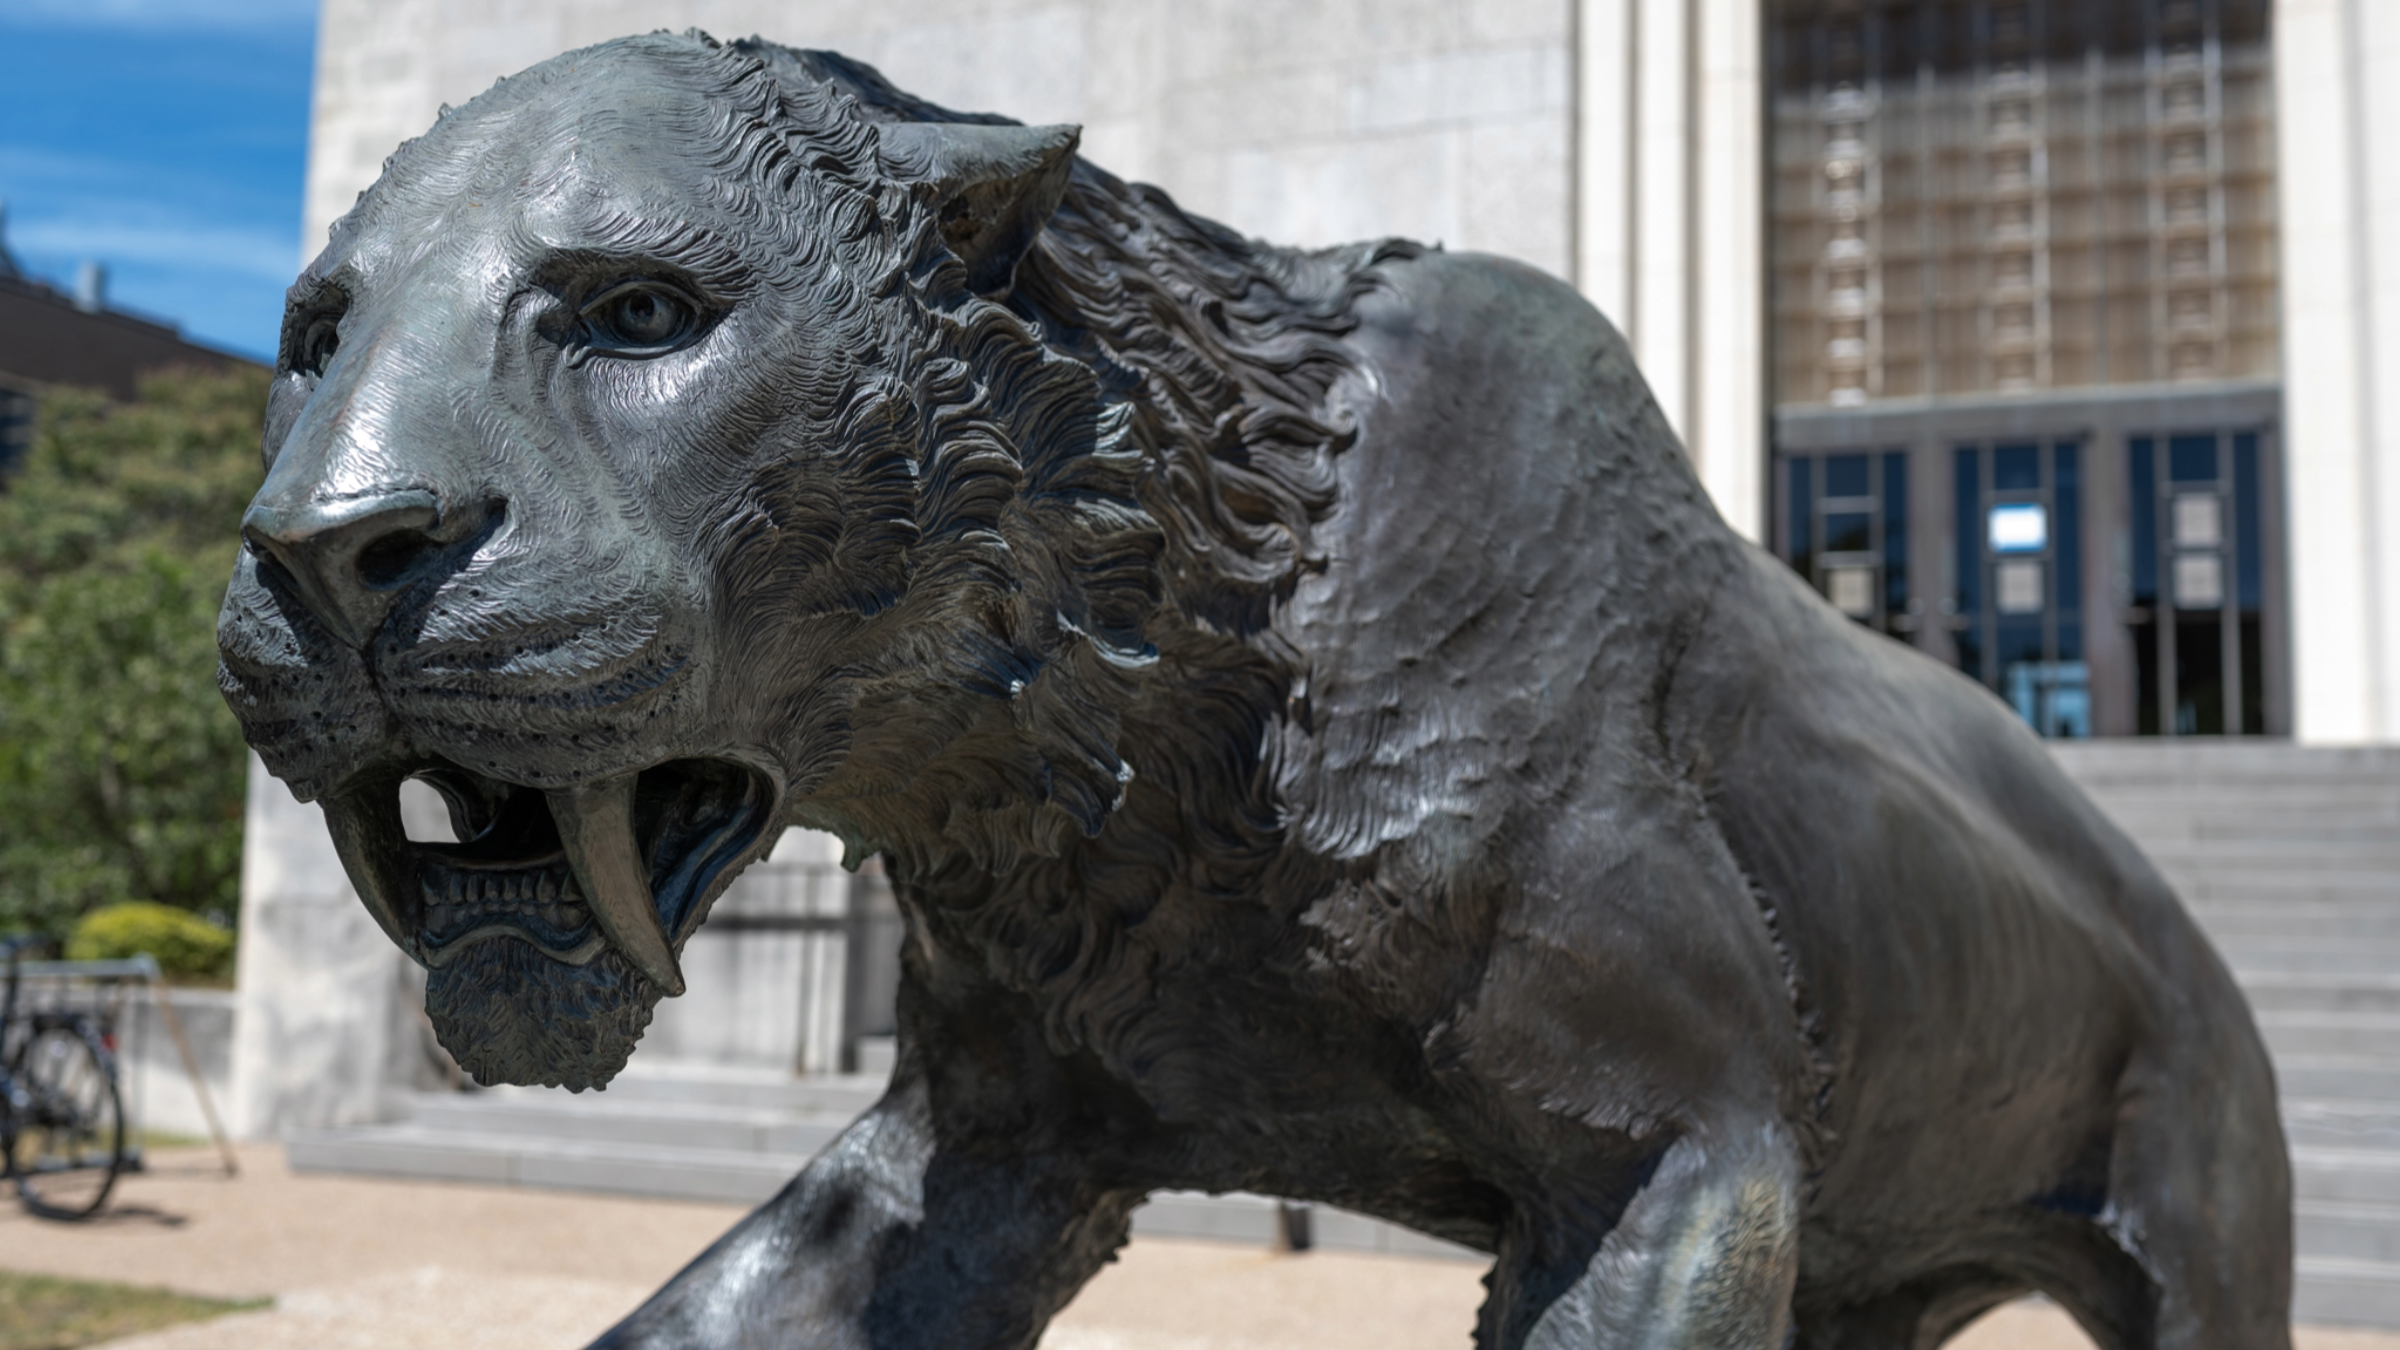 Image of a large bronze statue of a saber tooth cat in front of a limestone building